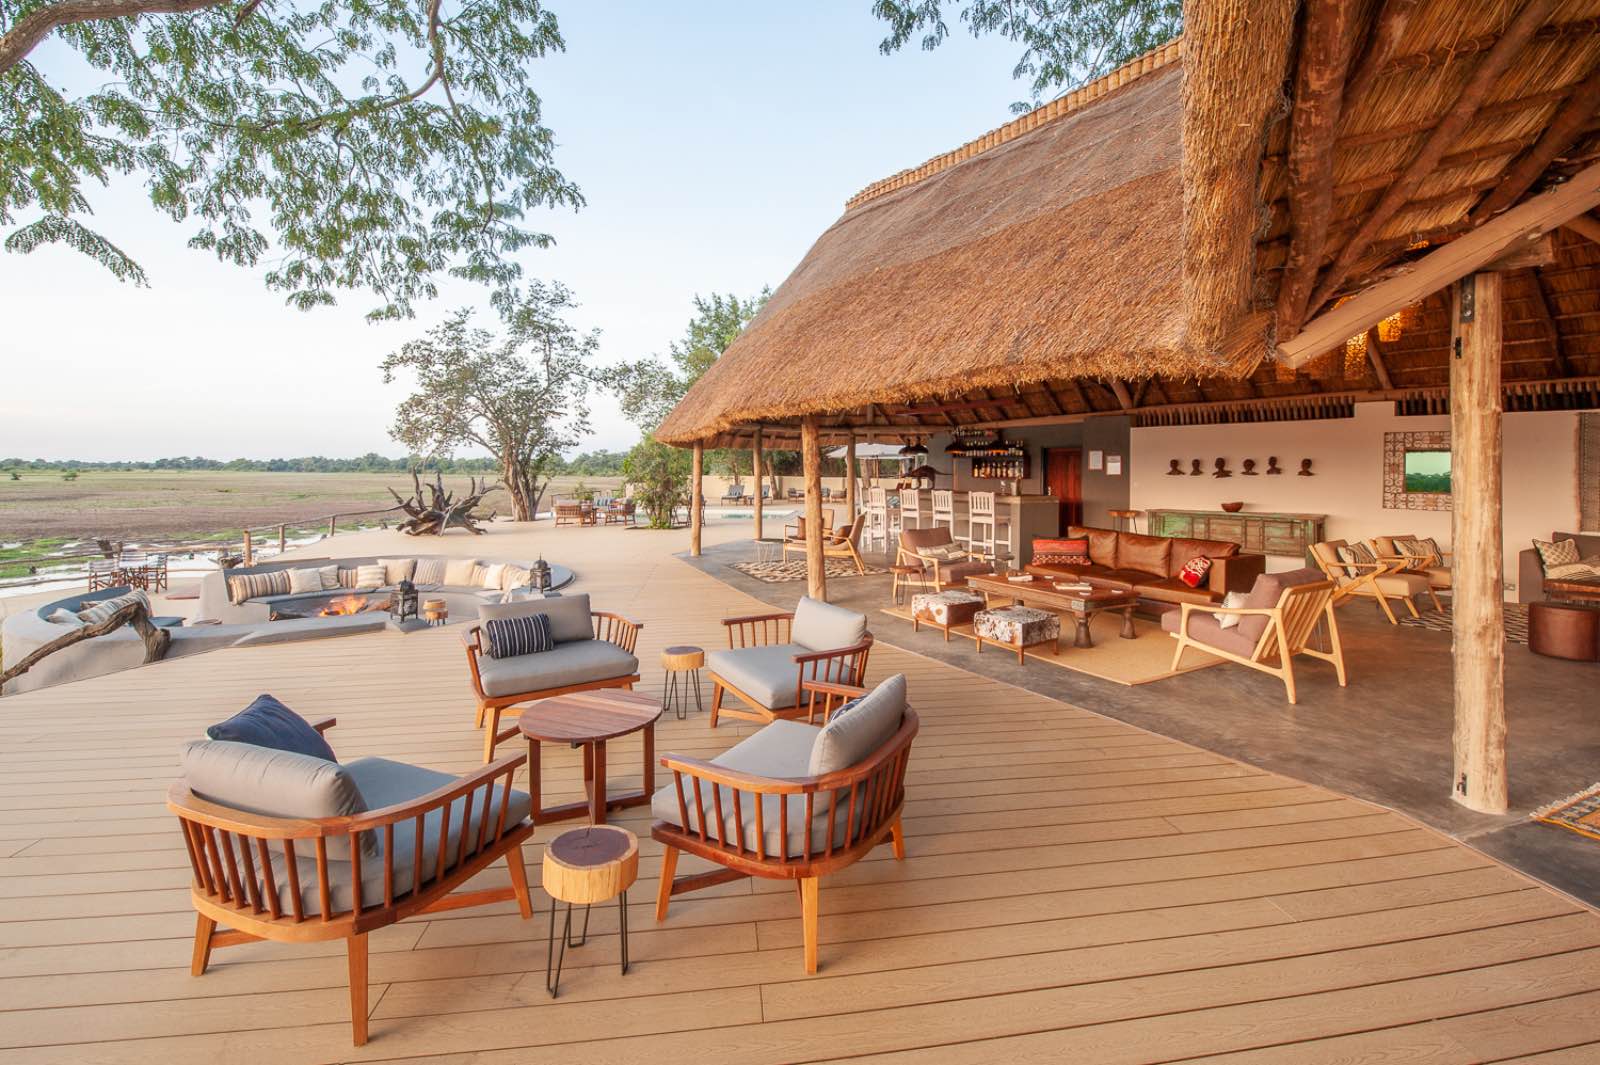 The expansive deck at Kafunta River Lodge offering plenty of places to sit and relax in the peaceful surroundings